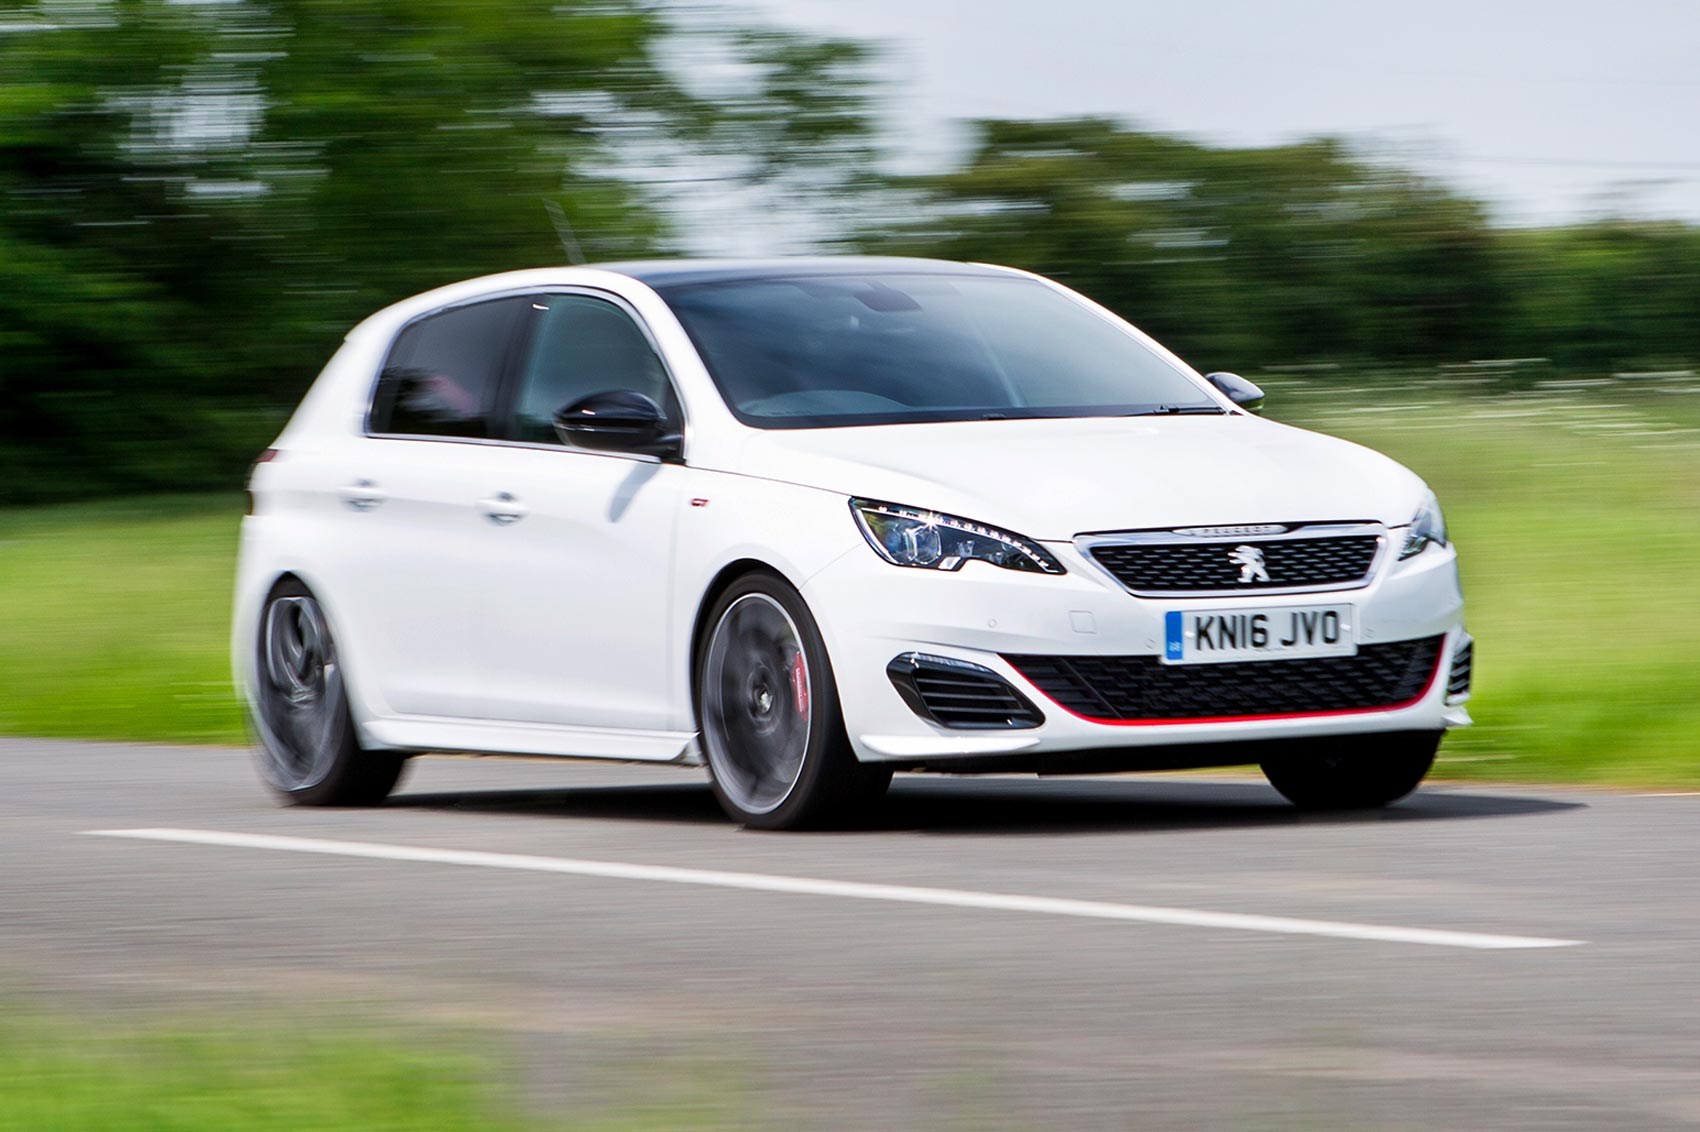 2018 Peugeot 308 GTi 270 quick performance review